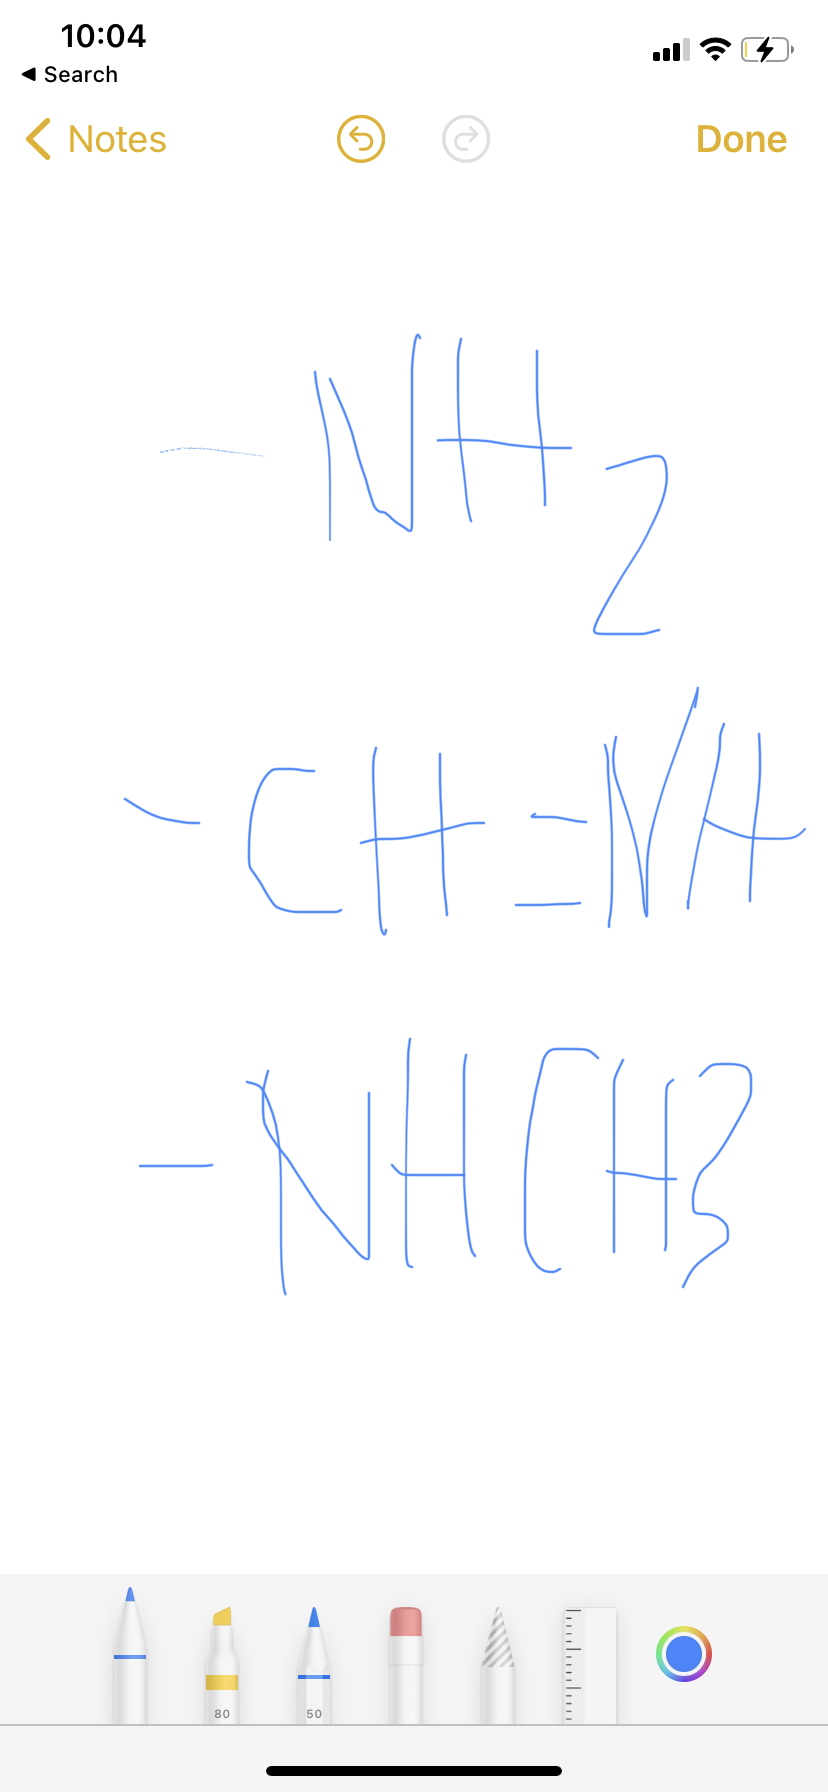 10:04
1 Search
( Notes
Done
NHz
-NH CH3
A A
80
50
